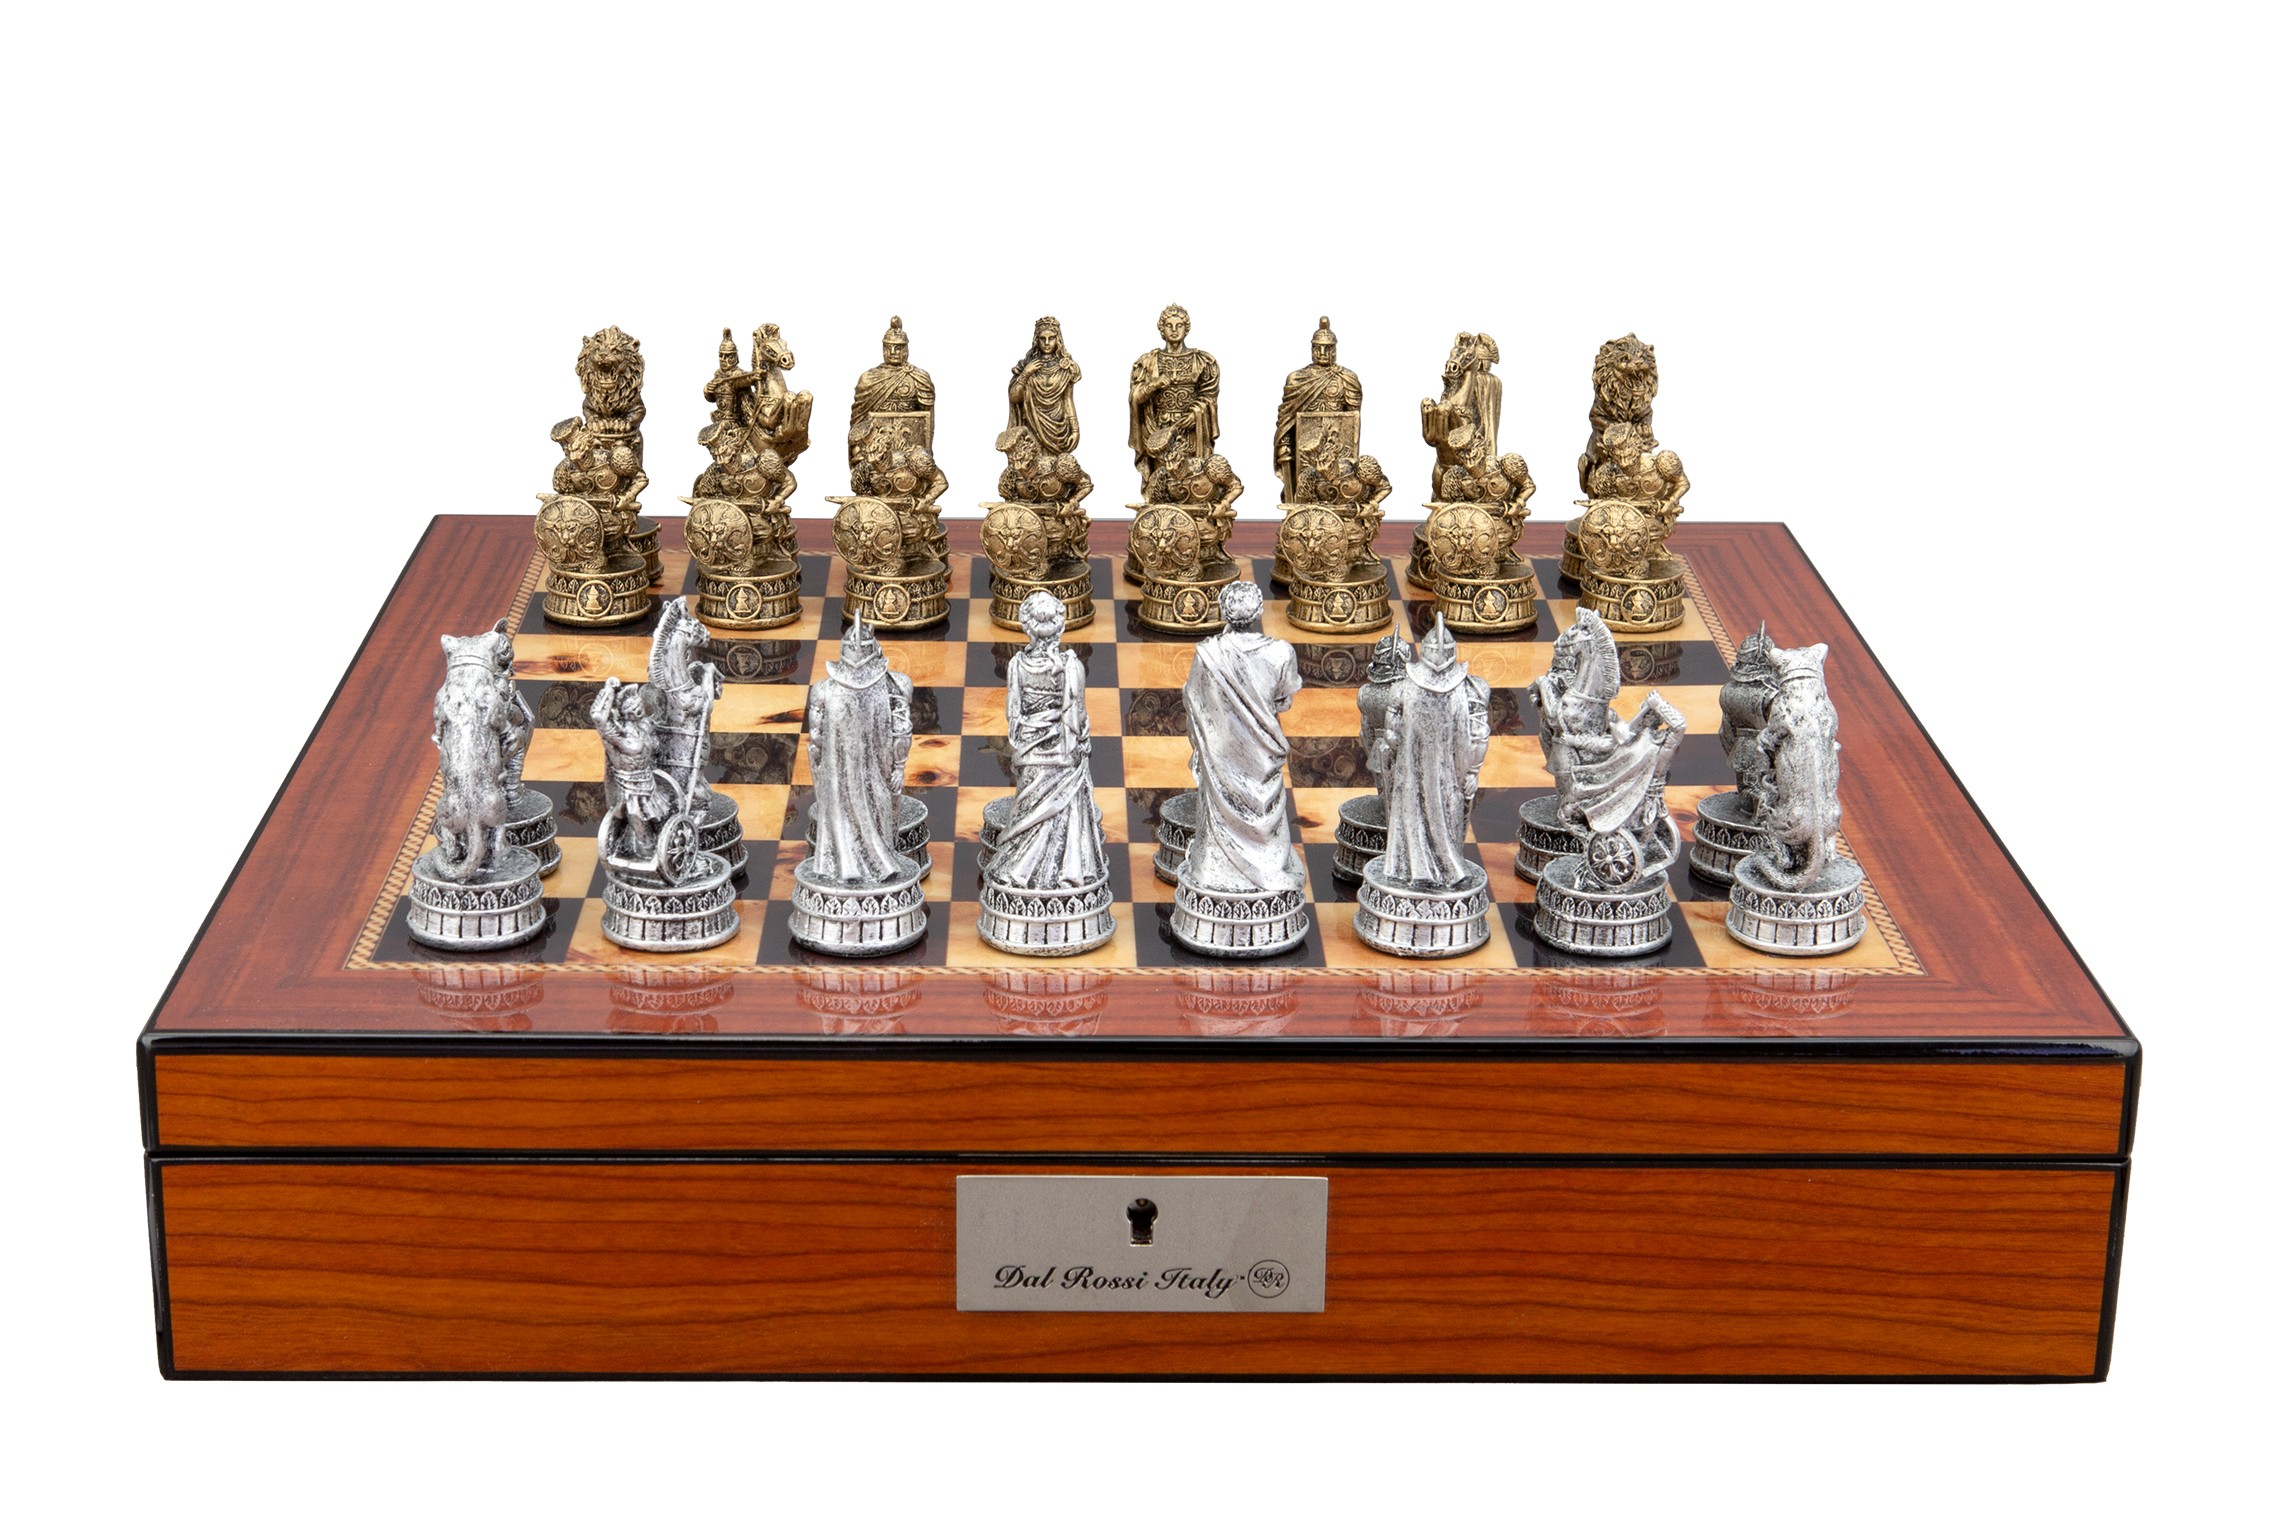 Dal Rossi Italy Roman Chessmen on a Walnut Finish Shiny Chess Box with Compartments 16"